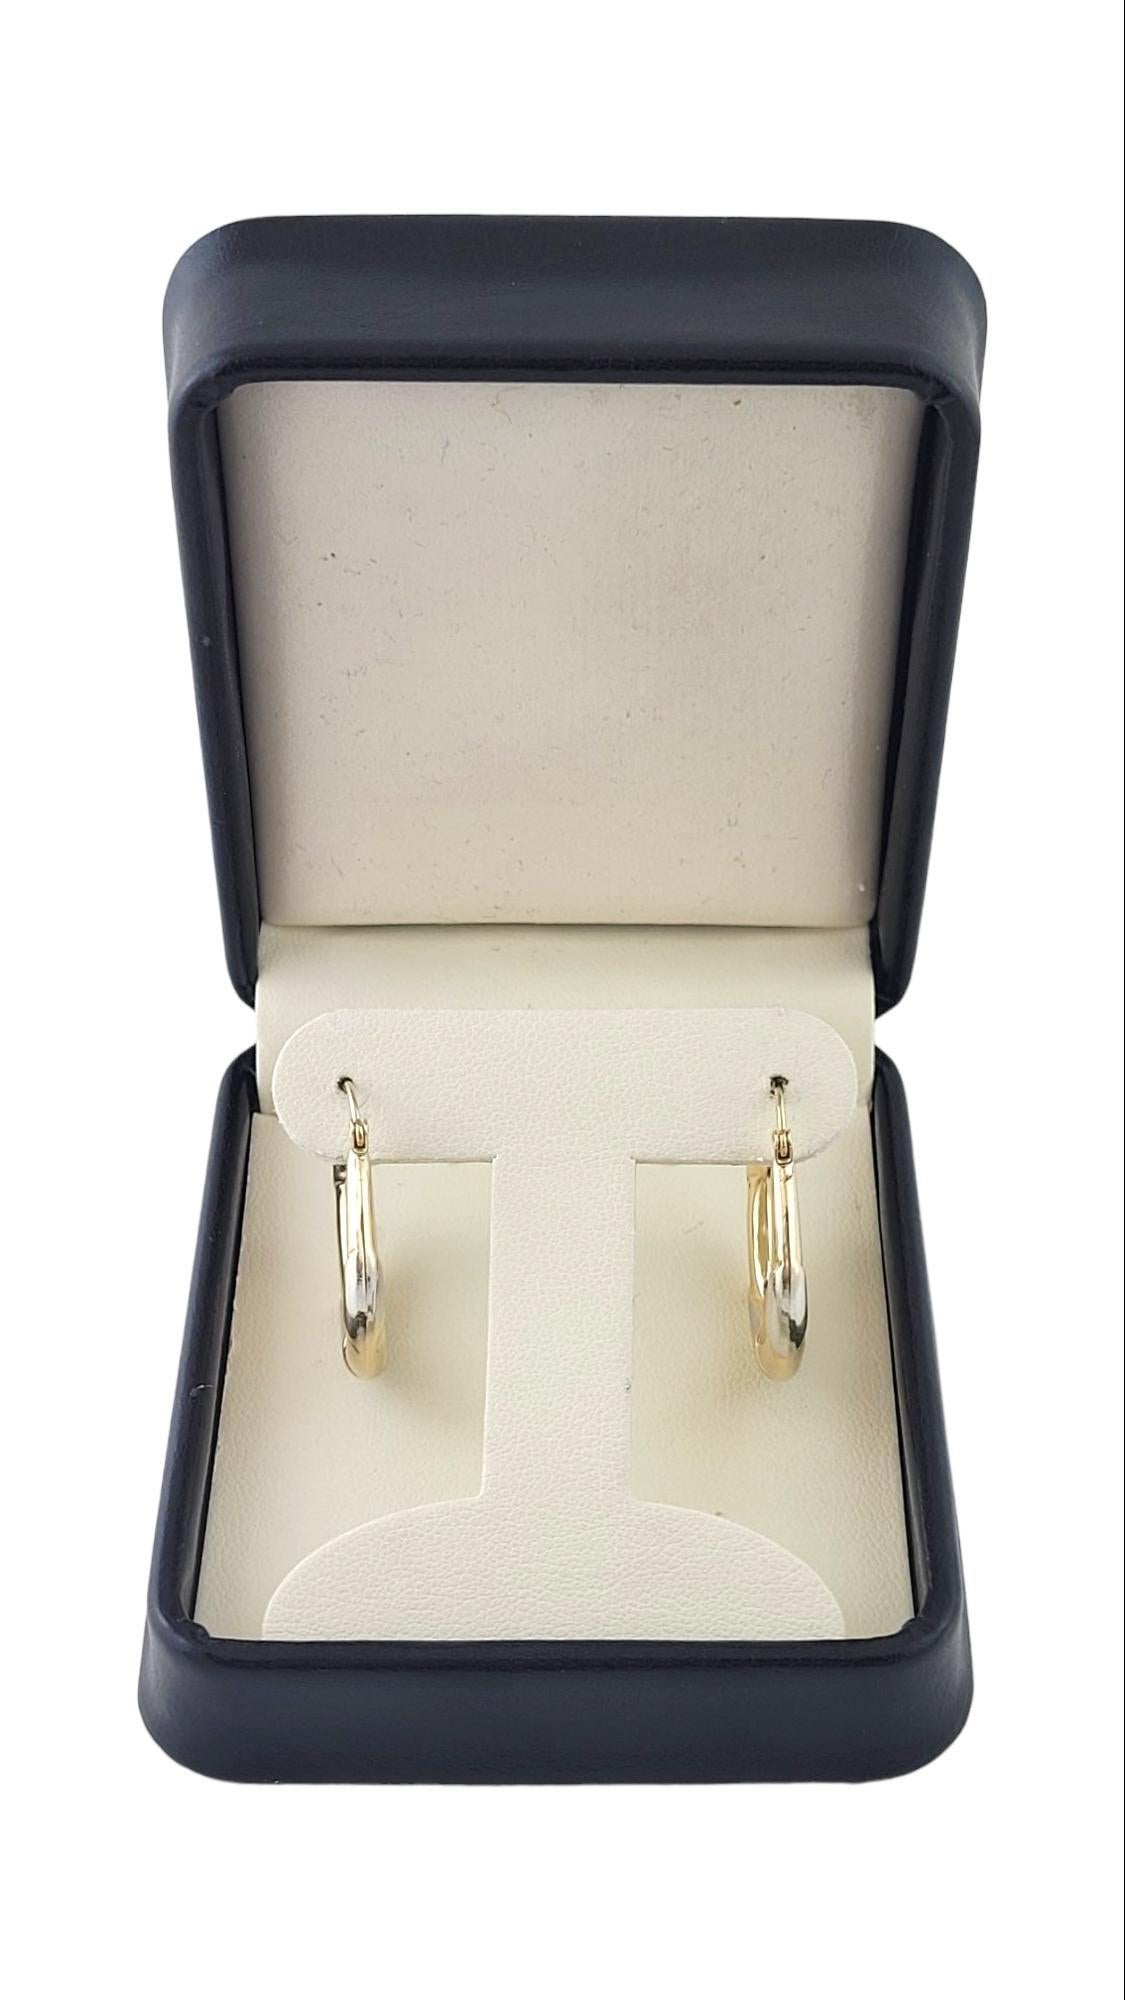 14K Yellow & White Gold Two Tone Hoop Earrings #15225 For Sale 1